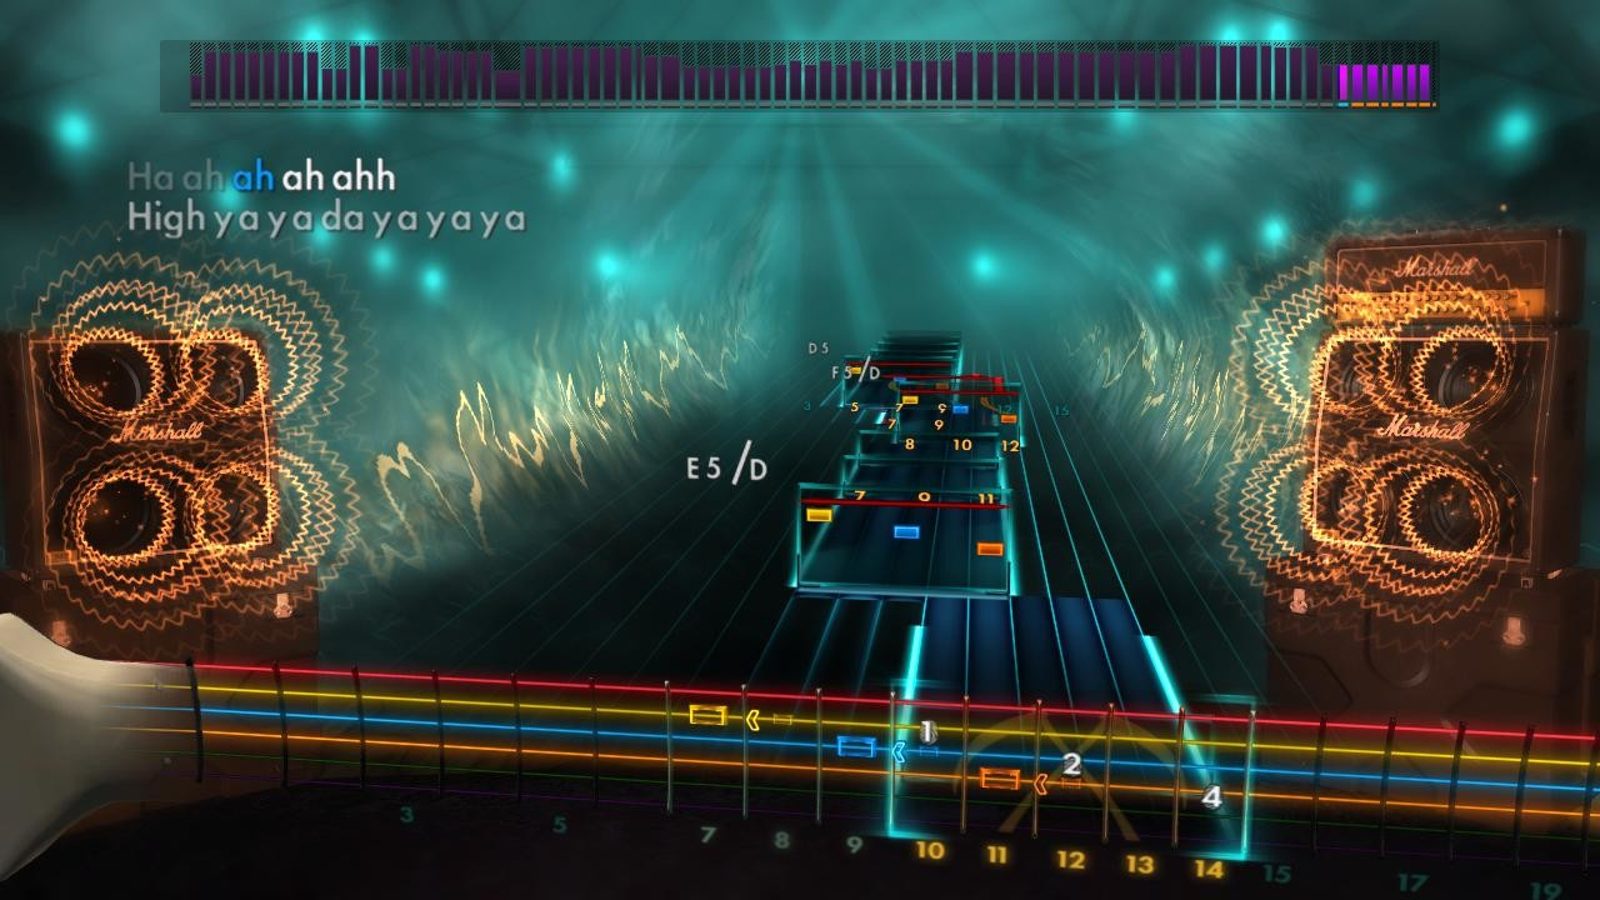 Rocksmith 2014 has been removed from sale ten years after release